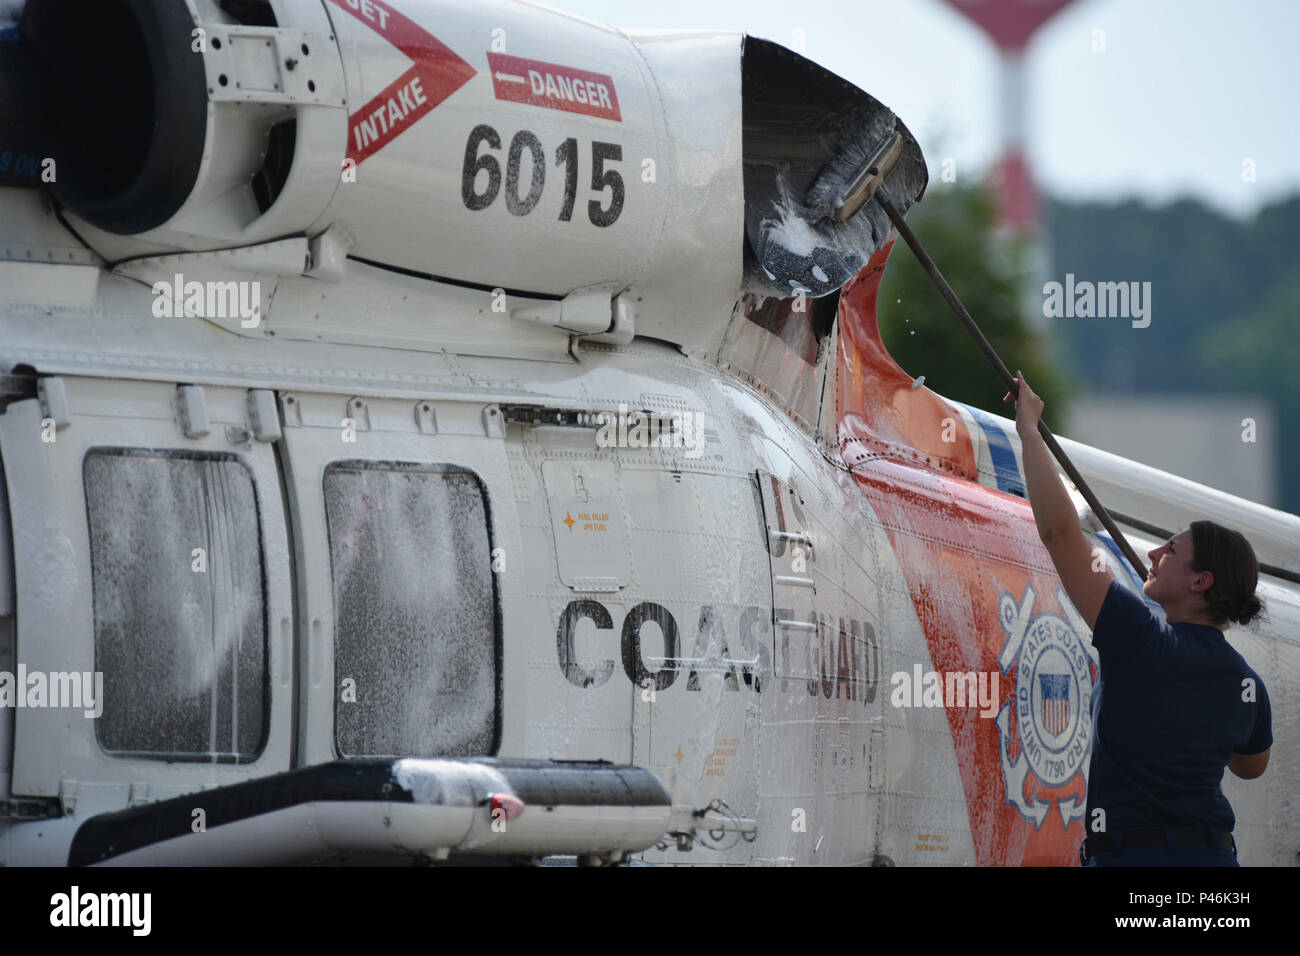 Over at Air Station Elizabeth City, Petty Officer 3rd Class Monique Pluard scrubs a MH-60 Jayhawk Monday, June 13, 2016. Constant maintanence and upkeep help air station crews remain mission ready at all times. U.S. Coast Guard illustration by Auxiliarist David Lau. Stock Photo